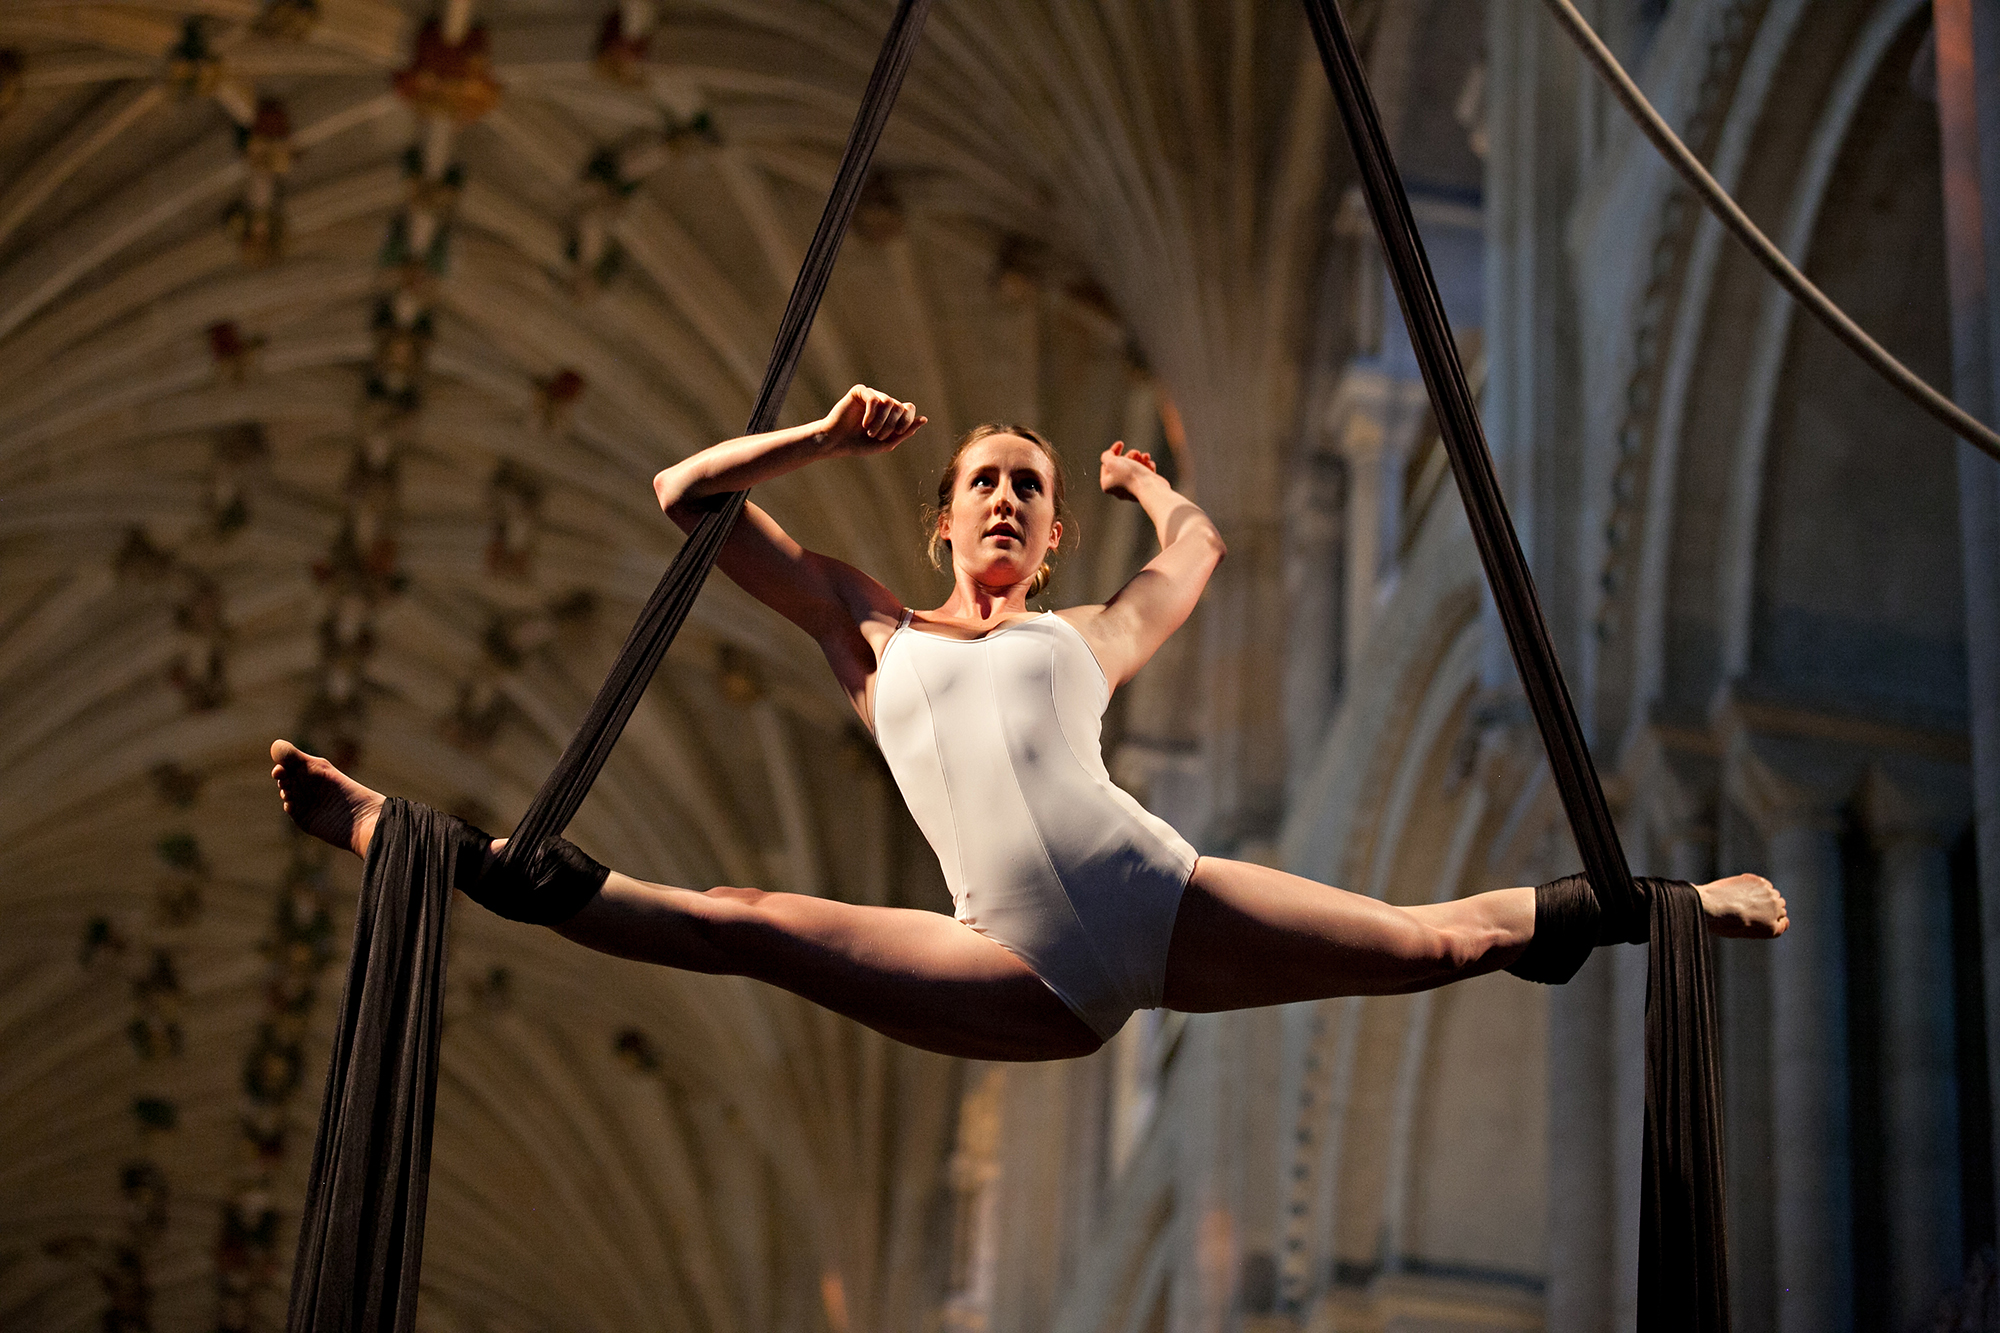 Photo from NNF12 show How Like An Angel, a woman performs the splits in mid-air while hanging from two pieces of silk.